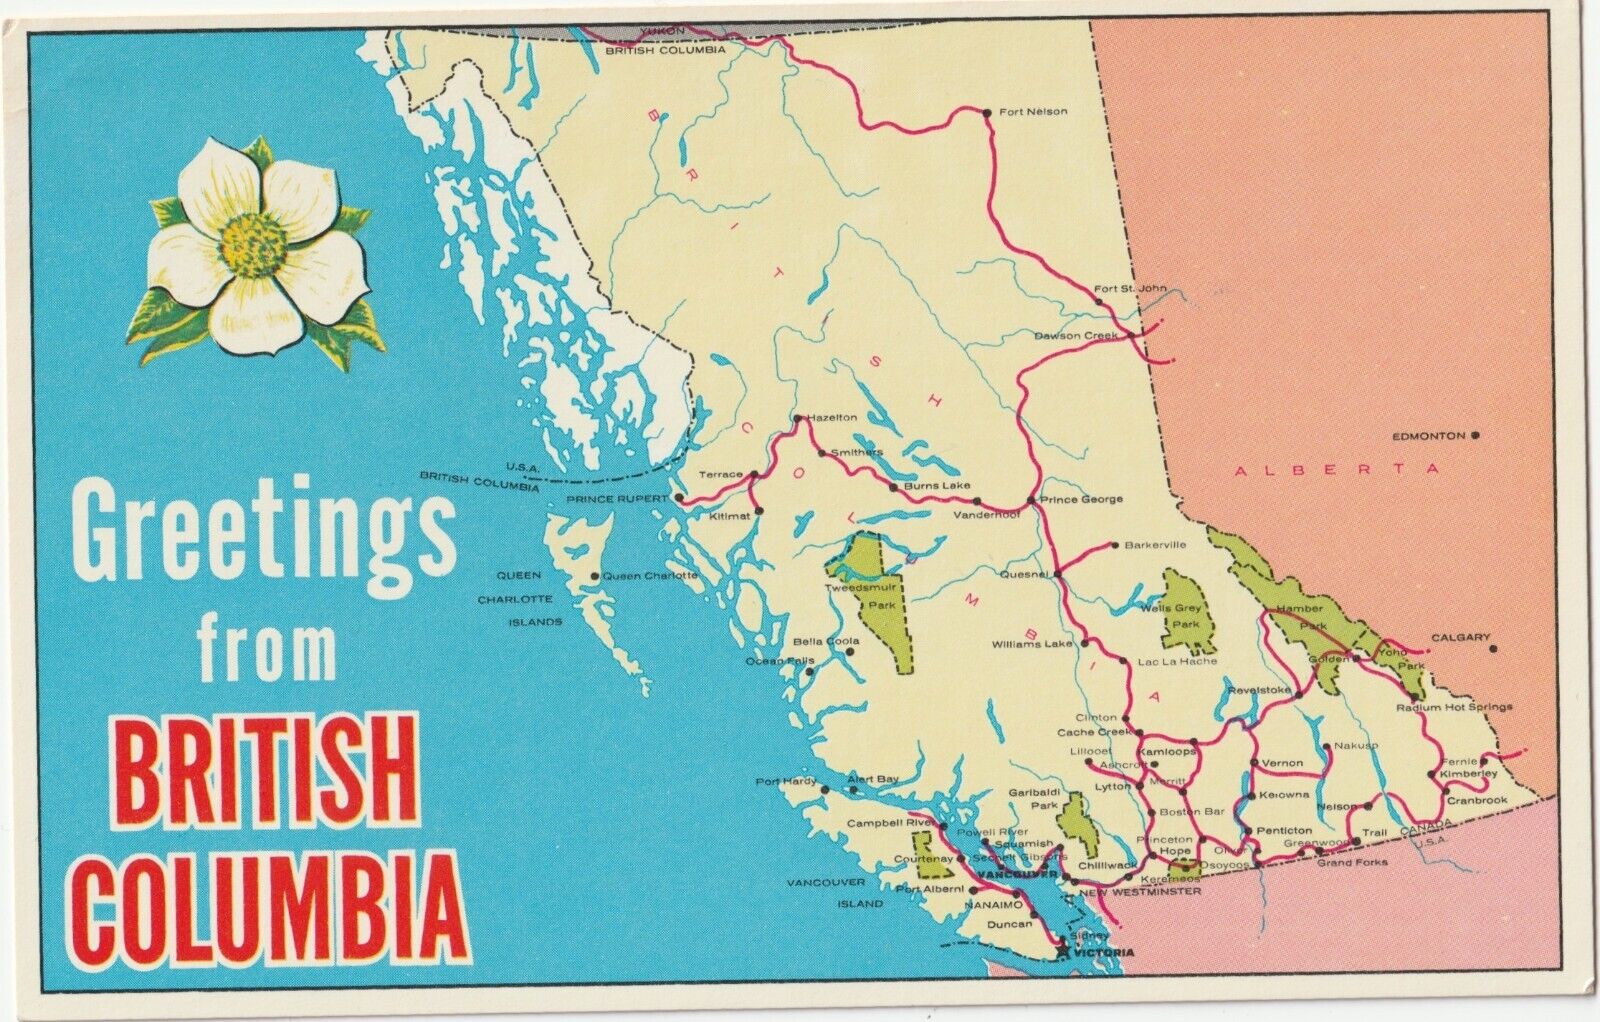 Greetings From British Columbia, Canada-vintage unposted postcard